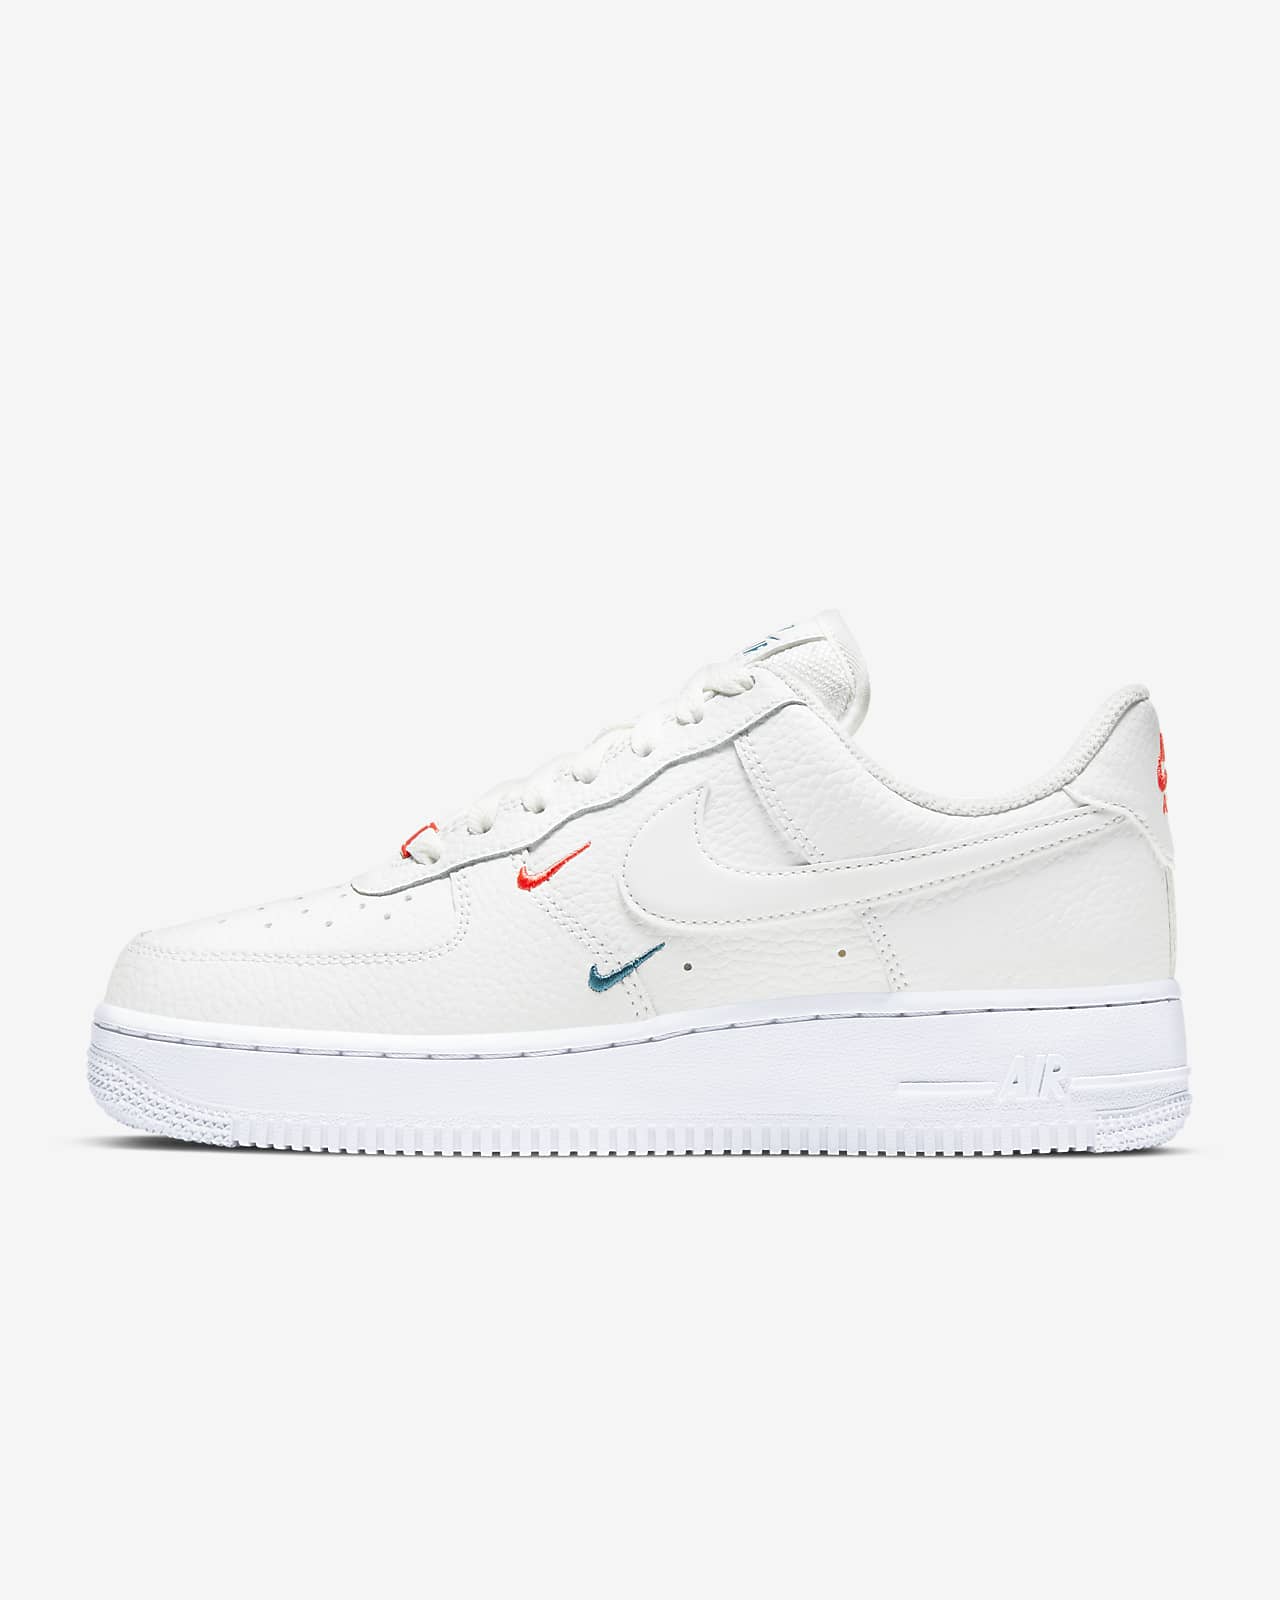 Chaussure Nike Air Force 1 '07 Essential pour Femme